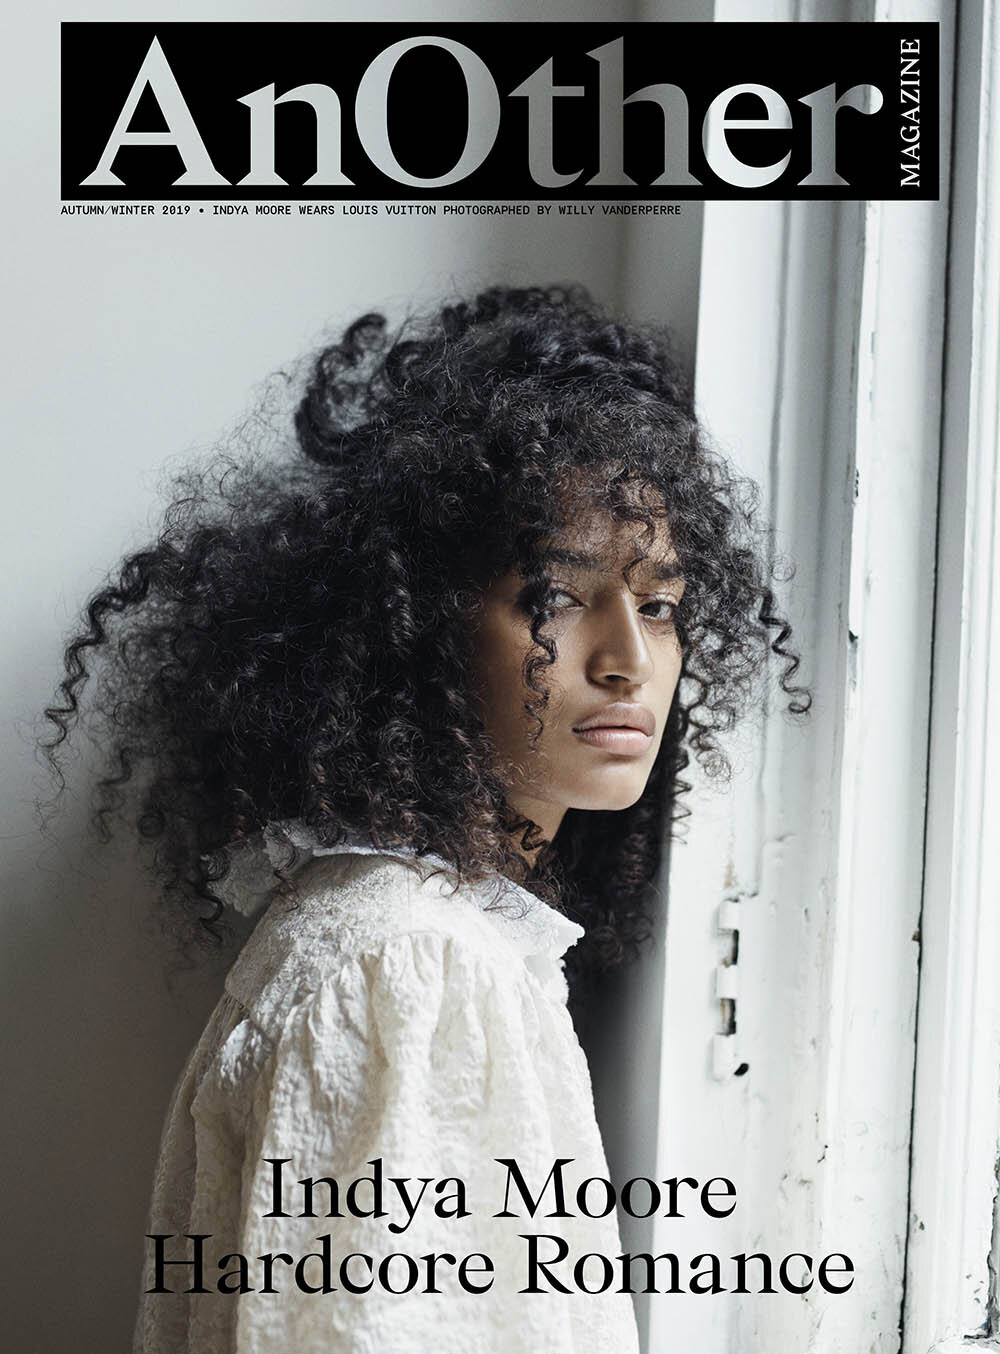 Indya-Moore-covers-AnOther-Magazine-Fall-Winter-2019-by-Willy-Vanderperre-1.jpg